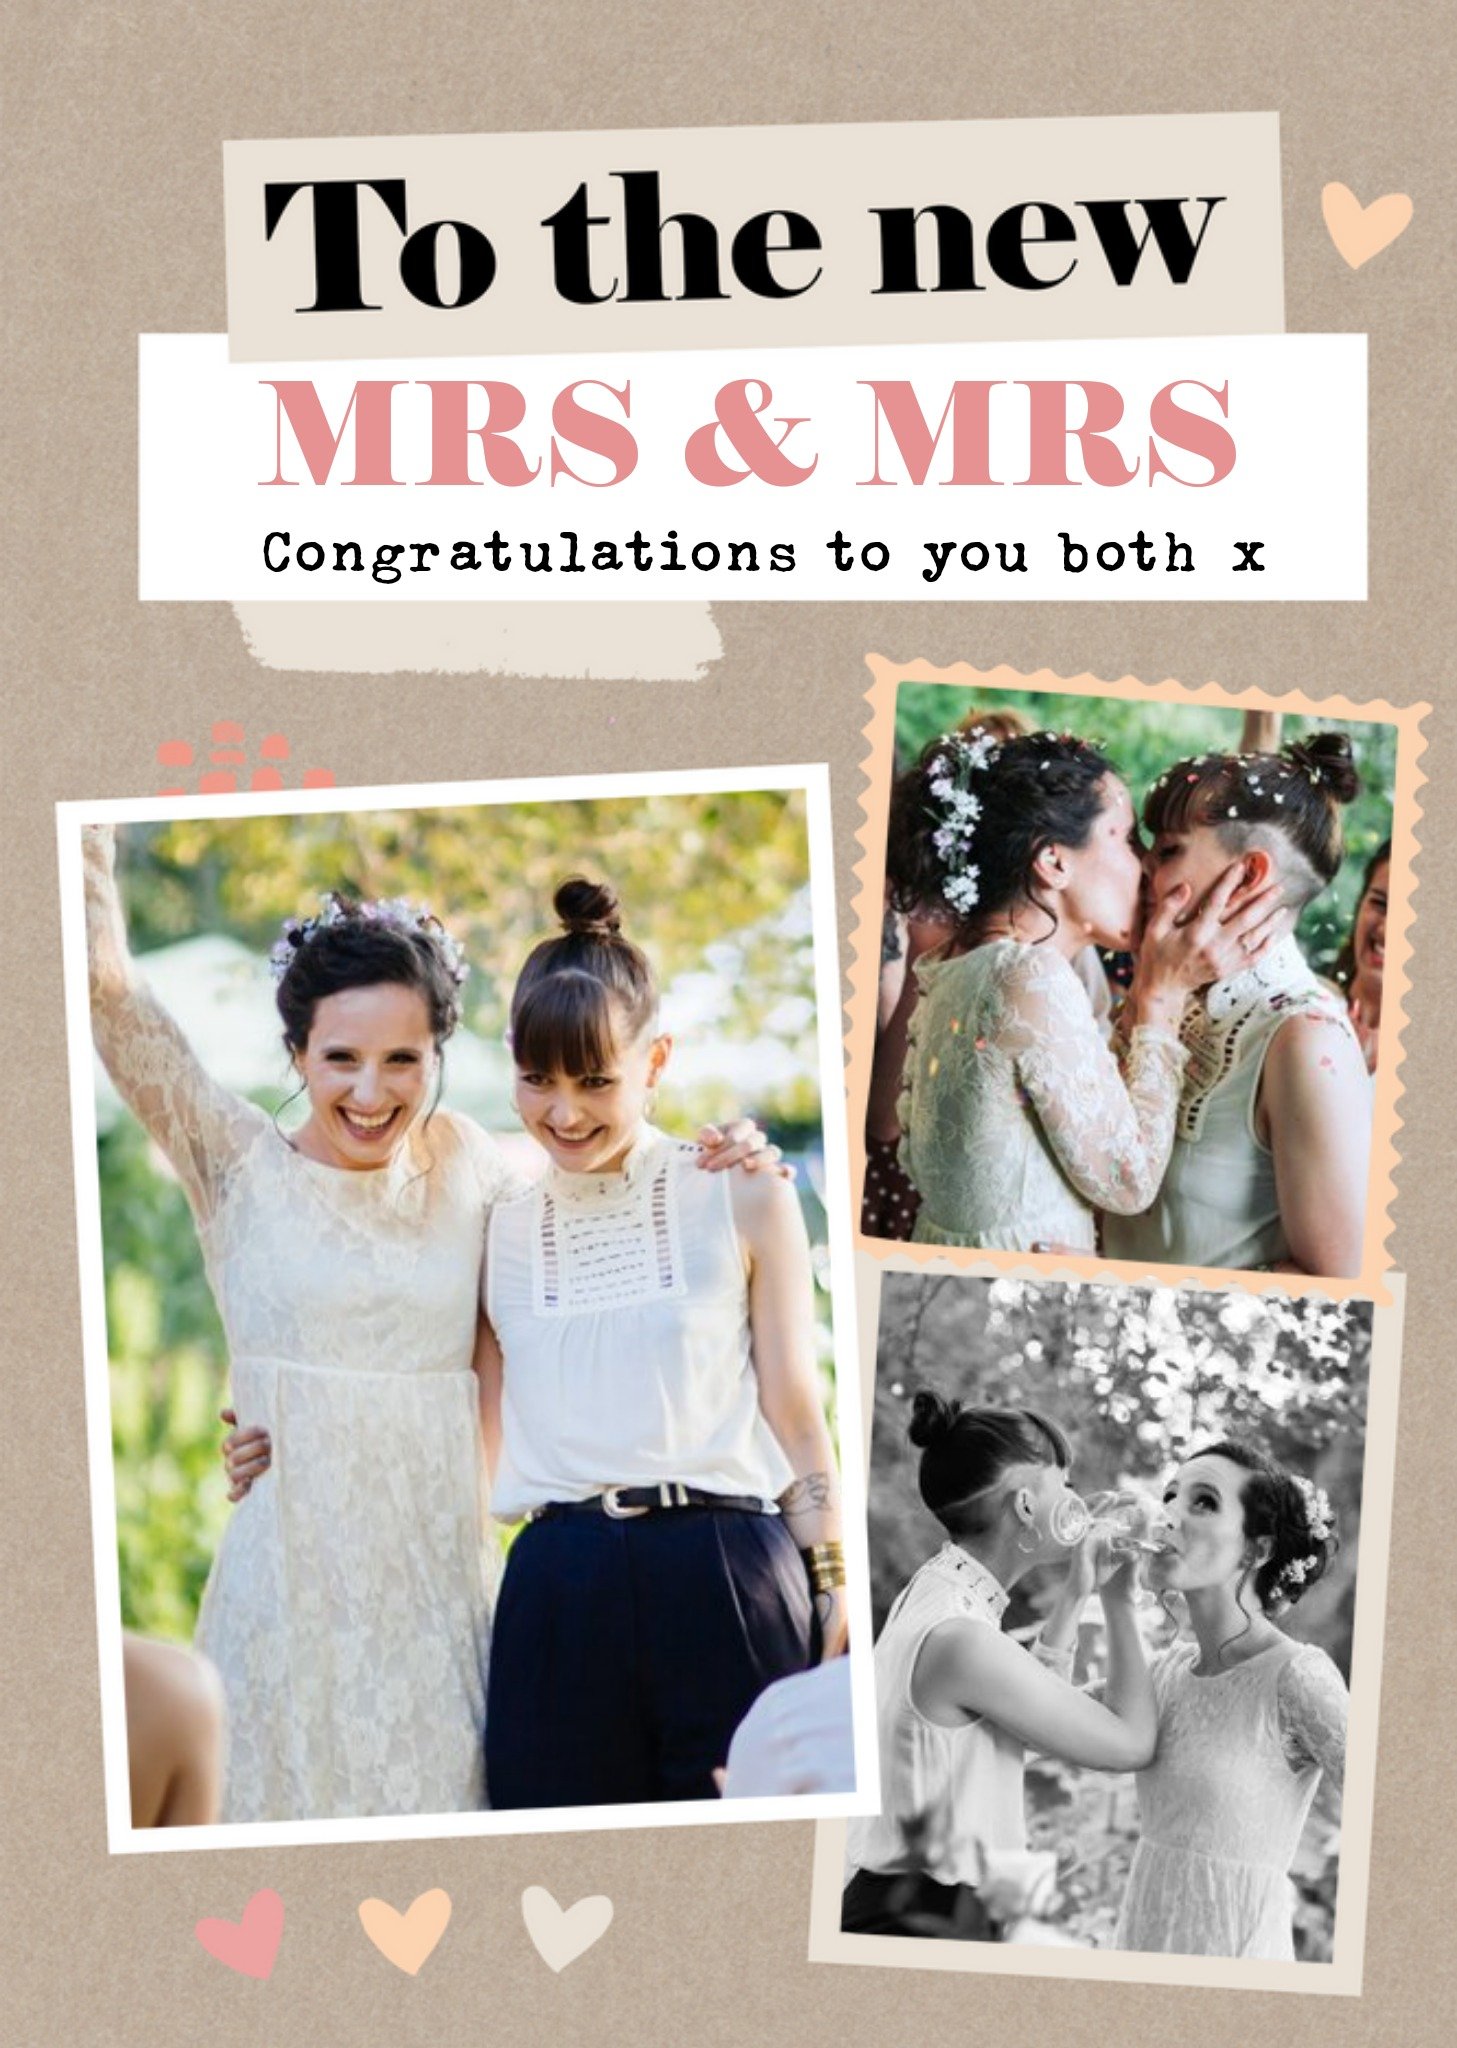 Moonpig To The New Mrs & Mrs Framed Photo Upload Congratulations Wedding Card, Large